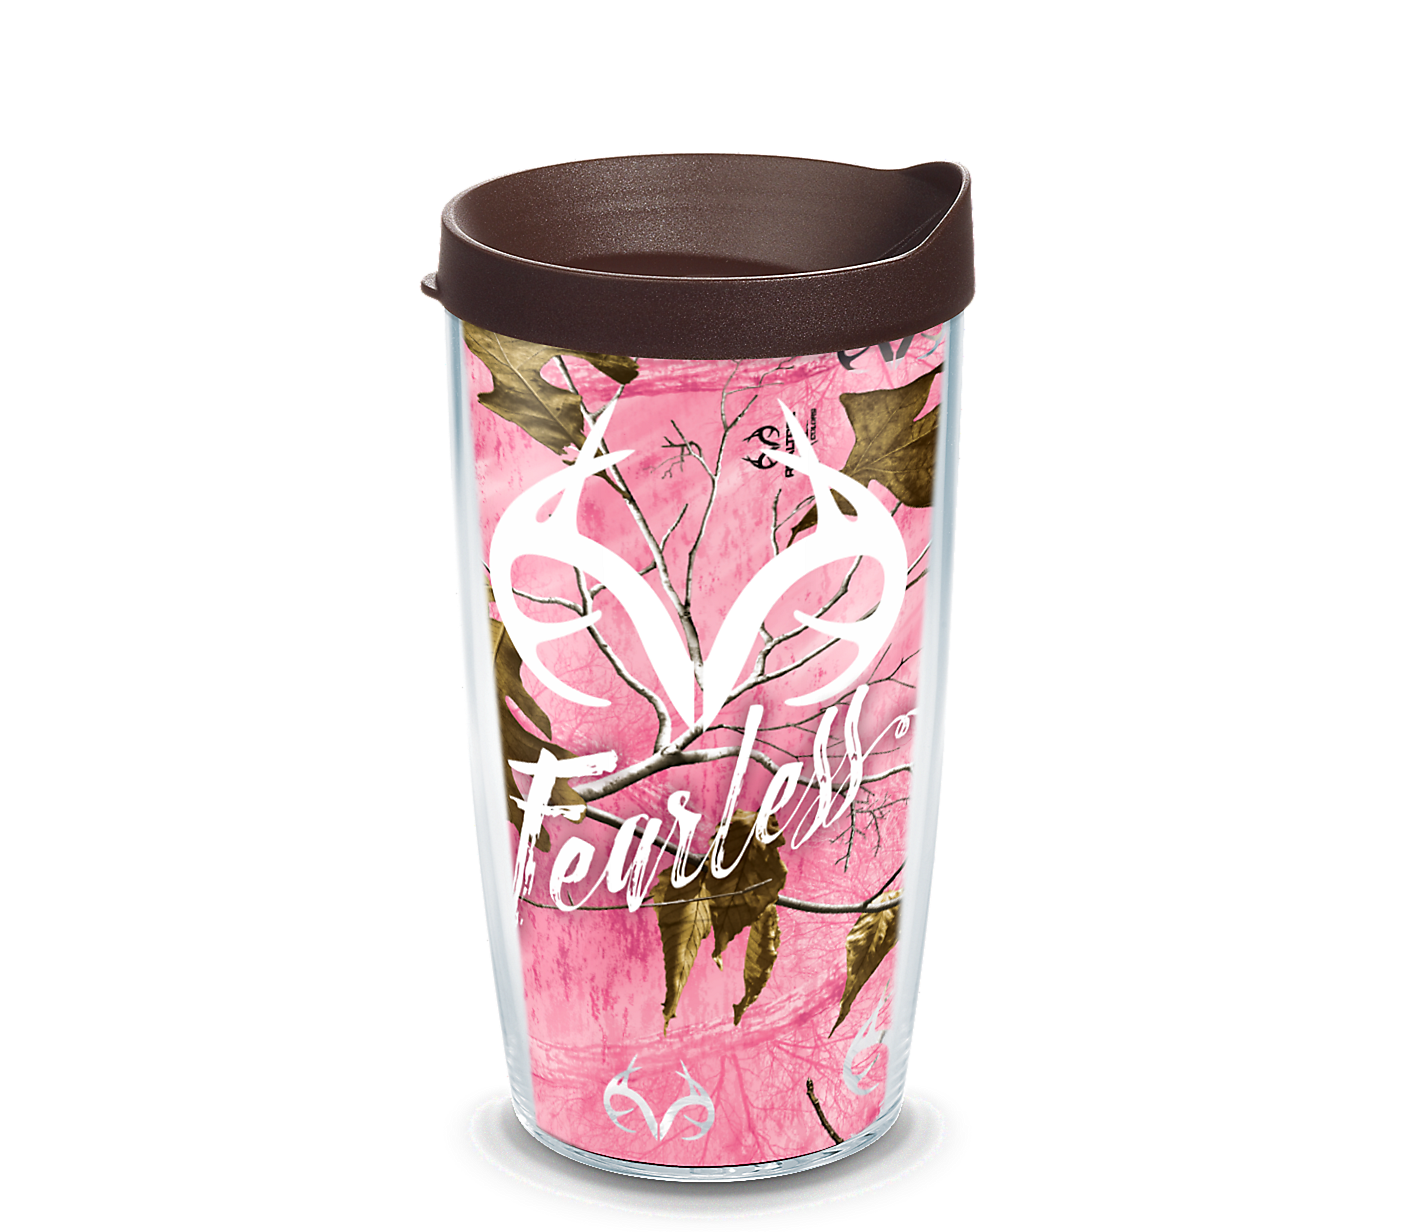 Realtree Fearless Tervis Tumbler